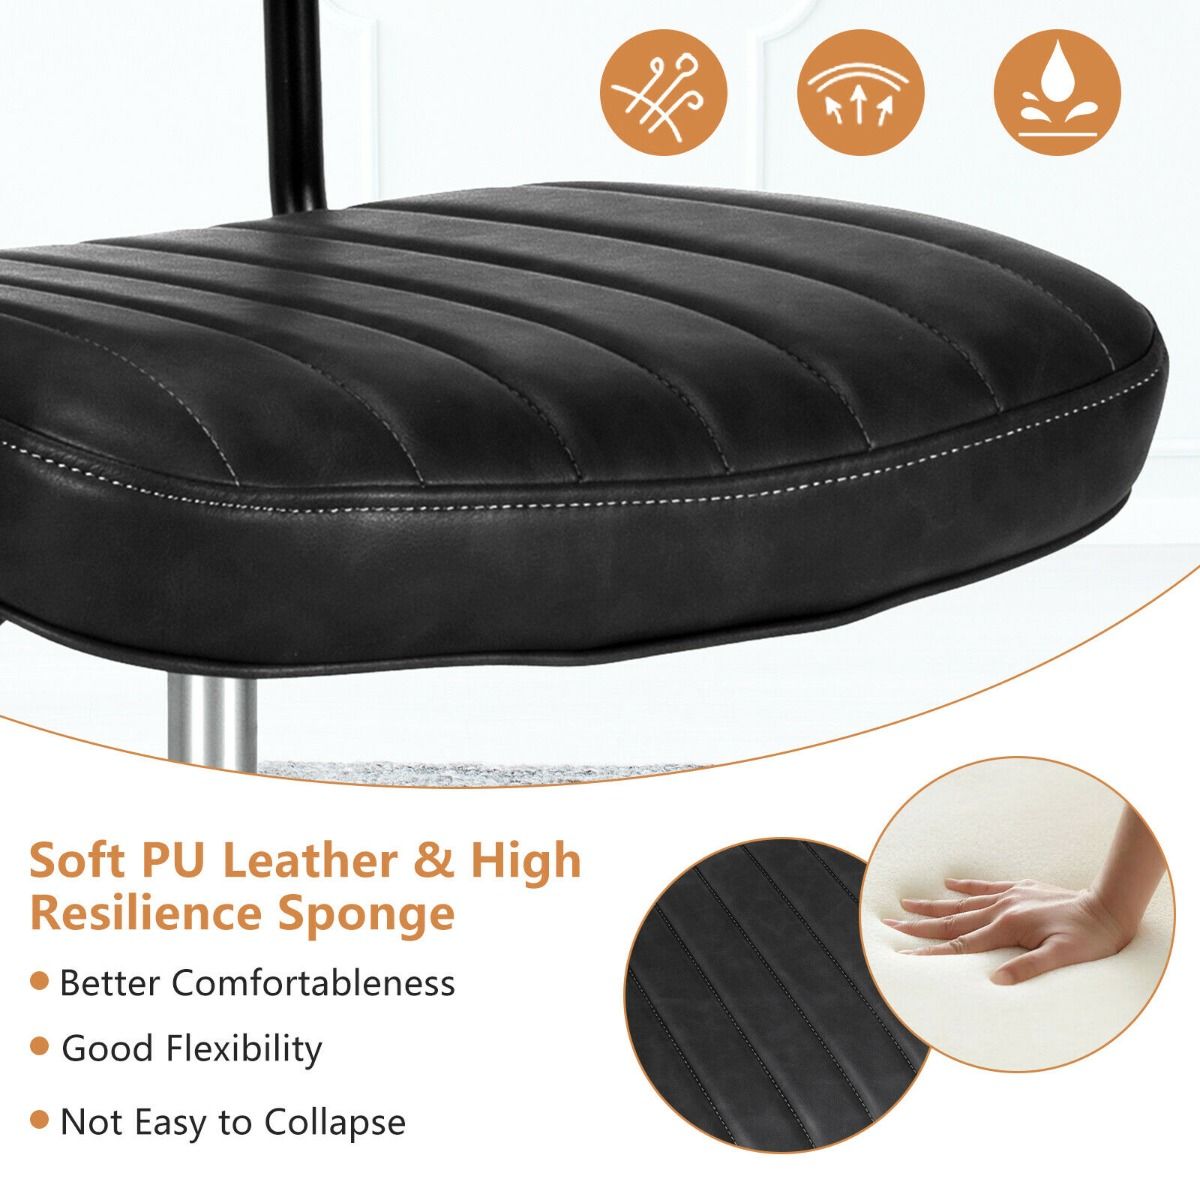 Adjustable Ergonomic Leisure Chair with PU Leather